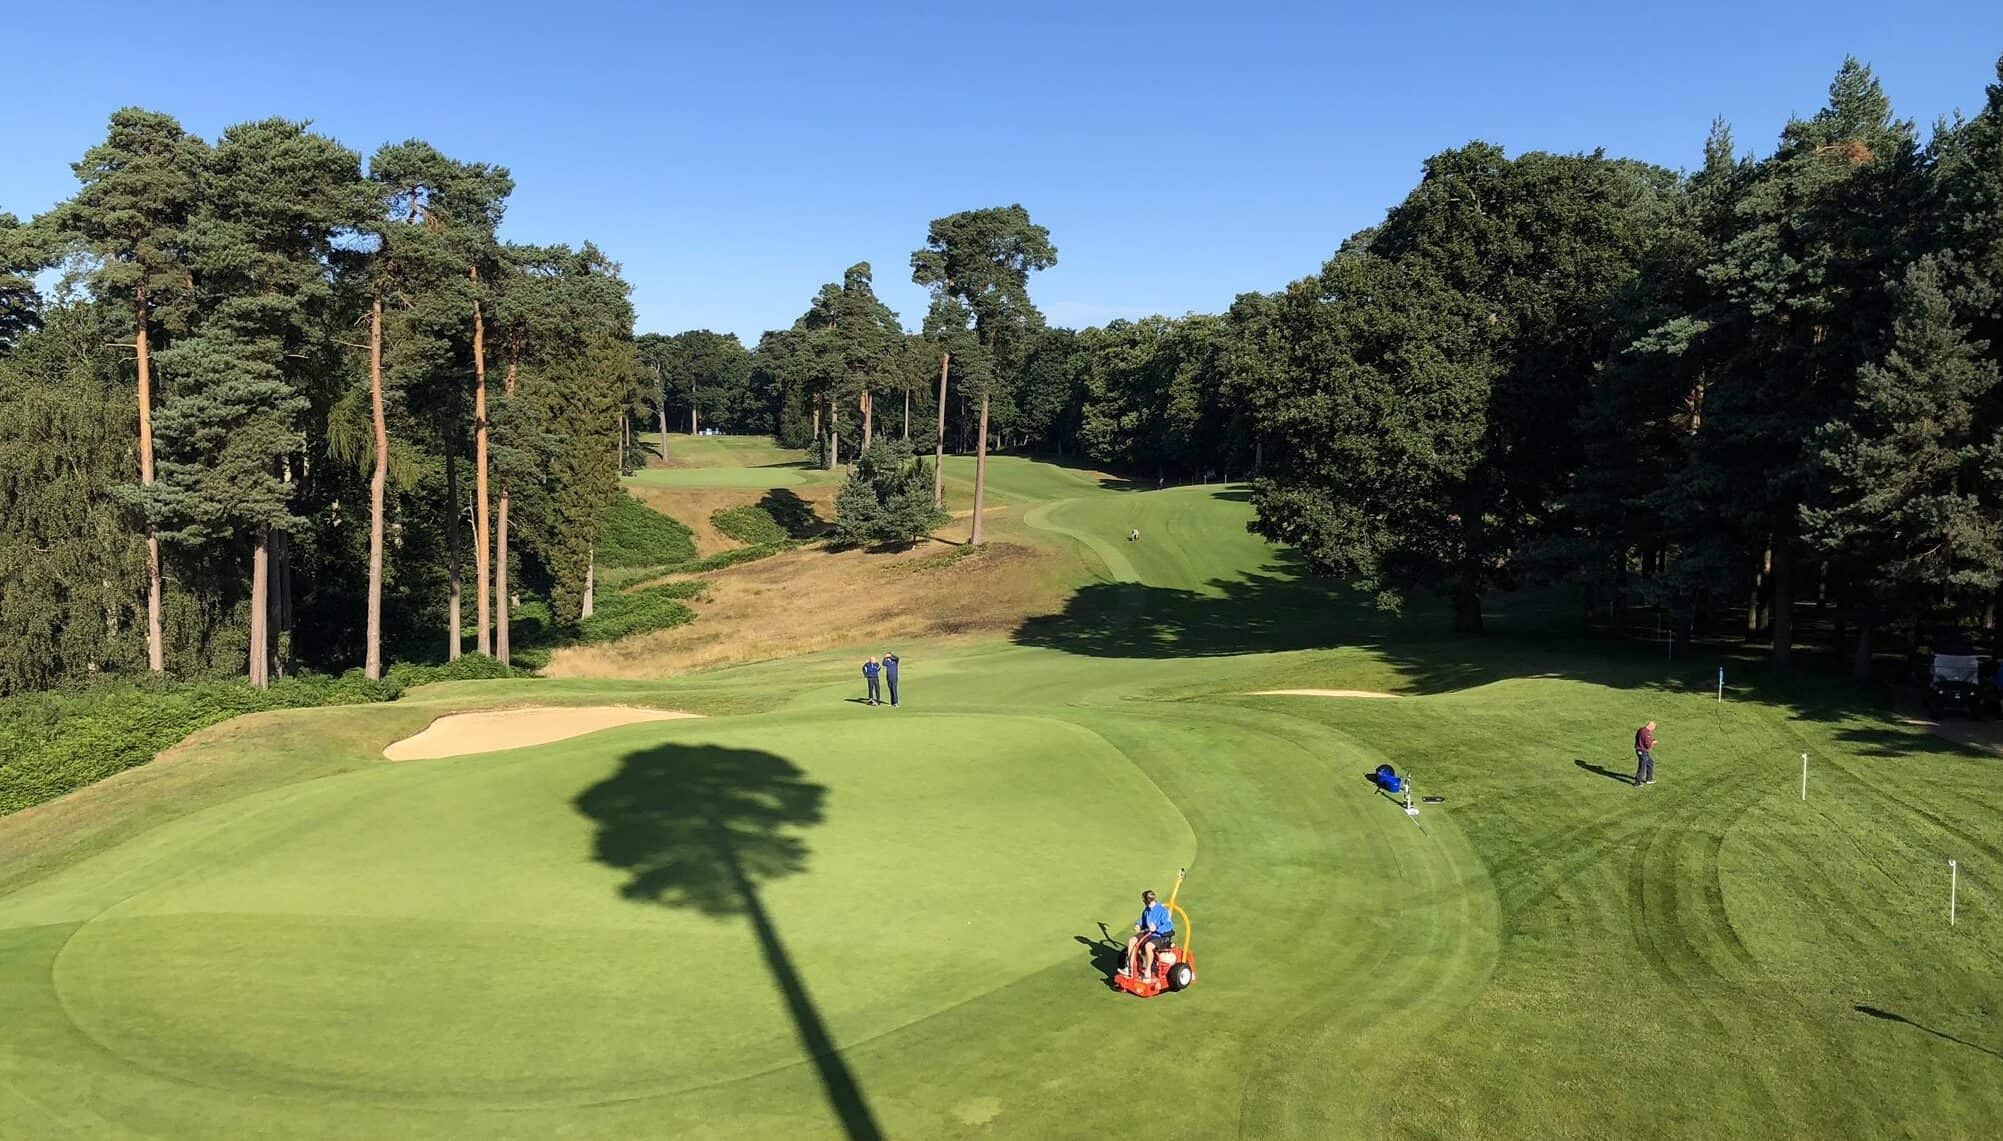 Woburn Golf Club's Marquess course has shades of Augusta